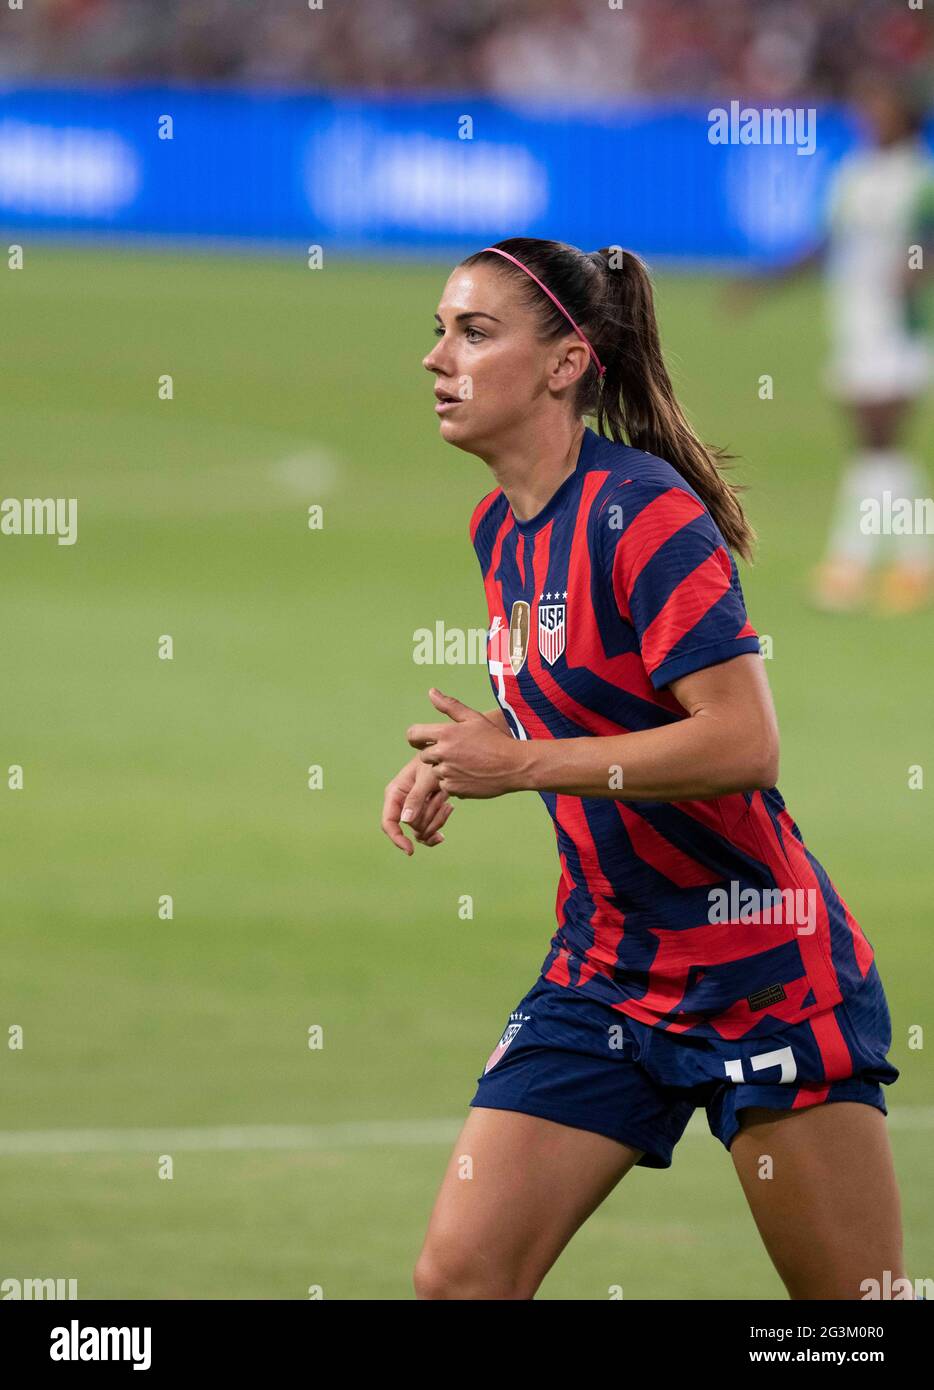 Austin, Texas, USA, June 16 2021: Austin, Texas, USA, June 16 2021: Veteran forward ALEX MORGAN brings the ball downfield during the first half of the US Women's National Team (USWNT) victory over Nigeria, 2-0 in the inaugural match of Austin's new Q2 Stadium. The U.S. women's team, an Olympic favorite, is wrapping up a series of summer matches to prep for the Tokyo Games. Credit: Bob Daemmrich/Alamy Live News Stock Photo